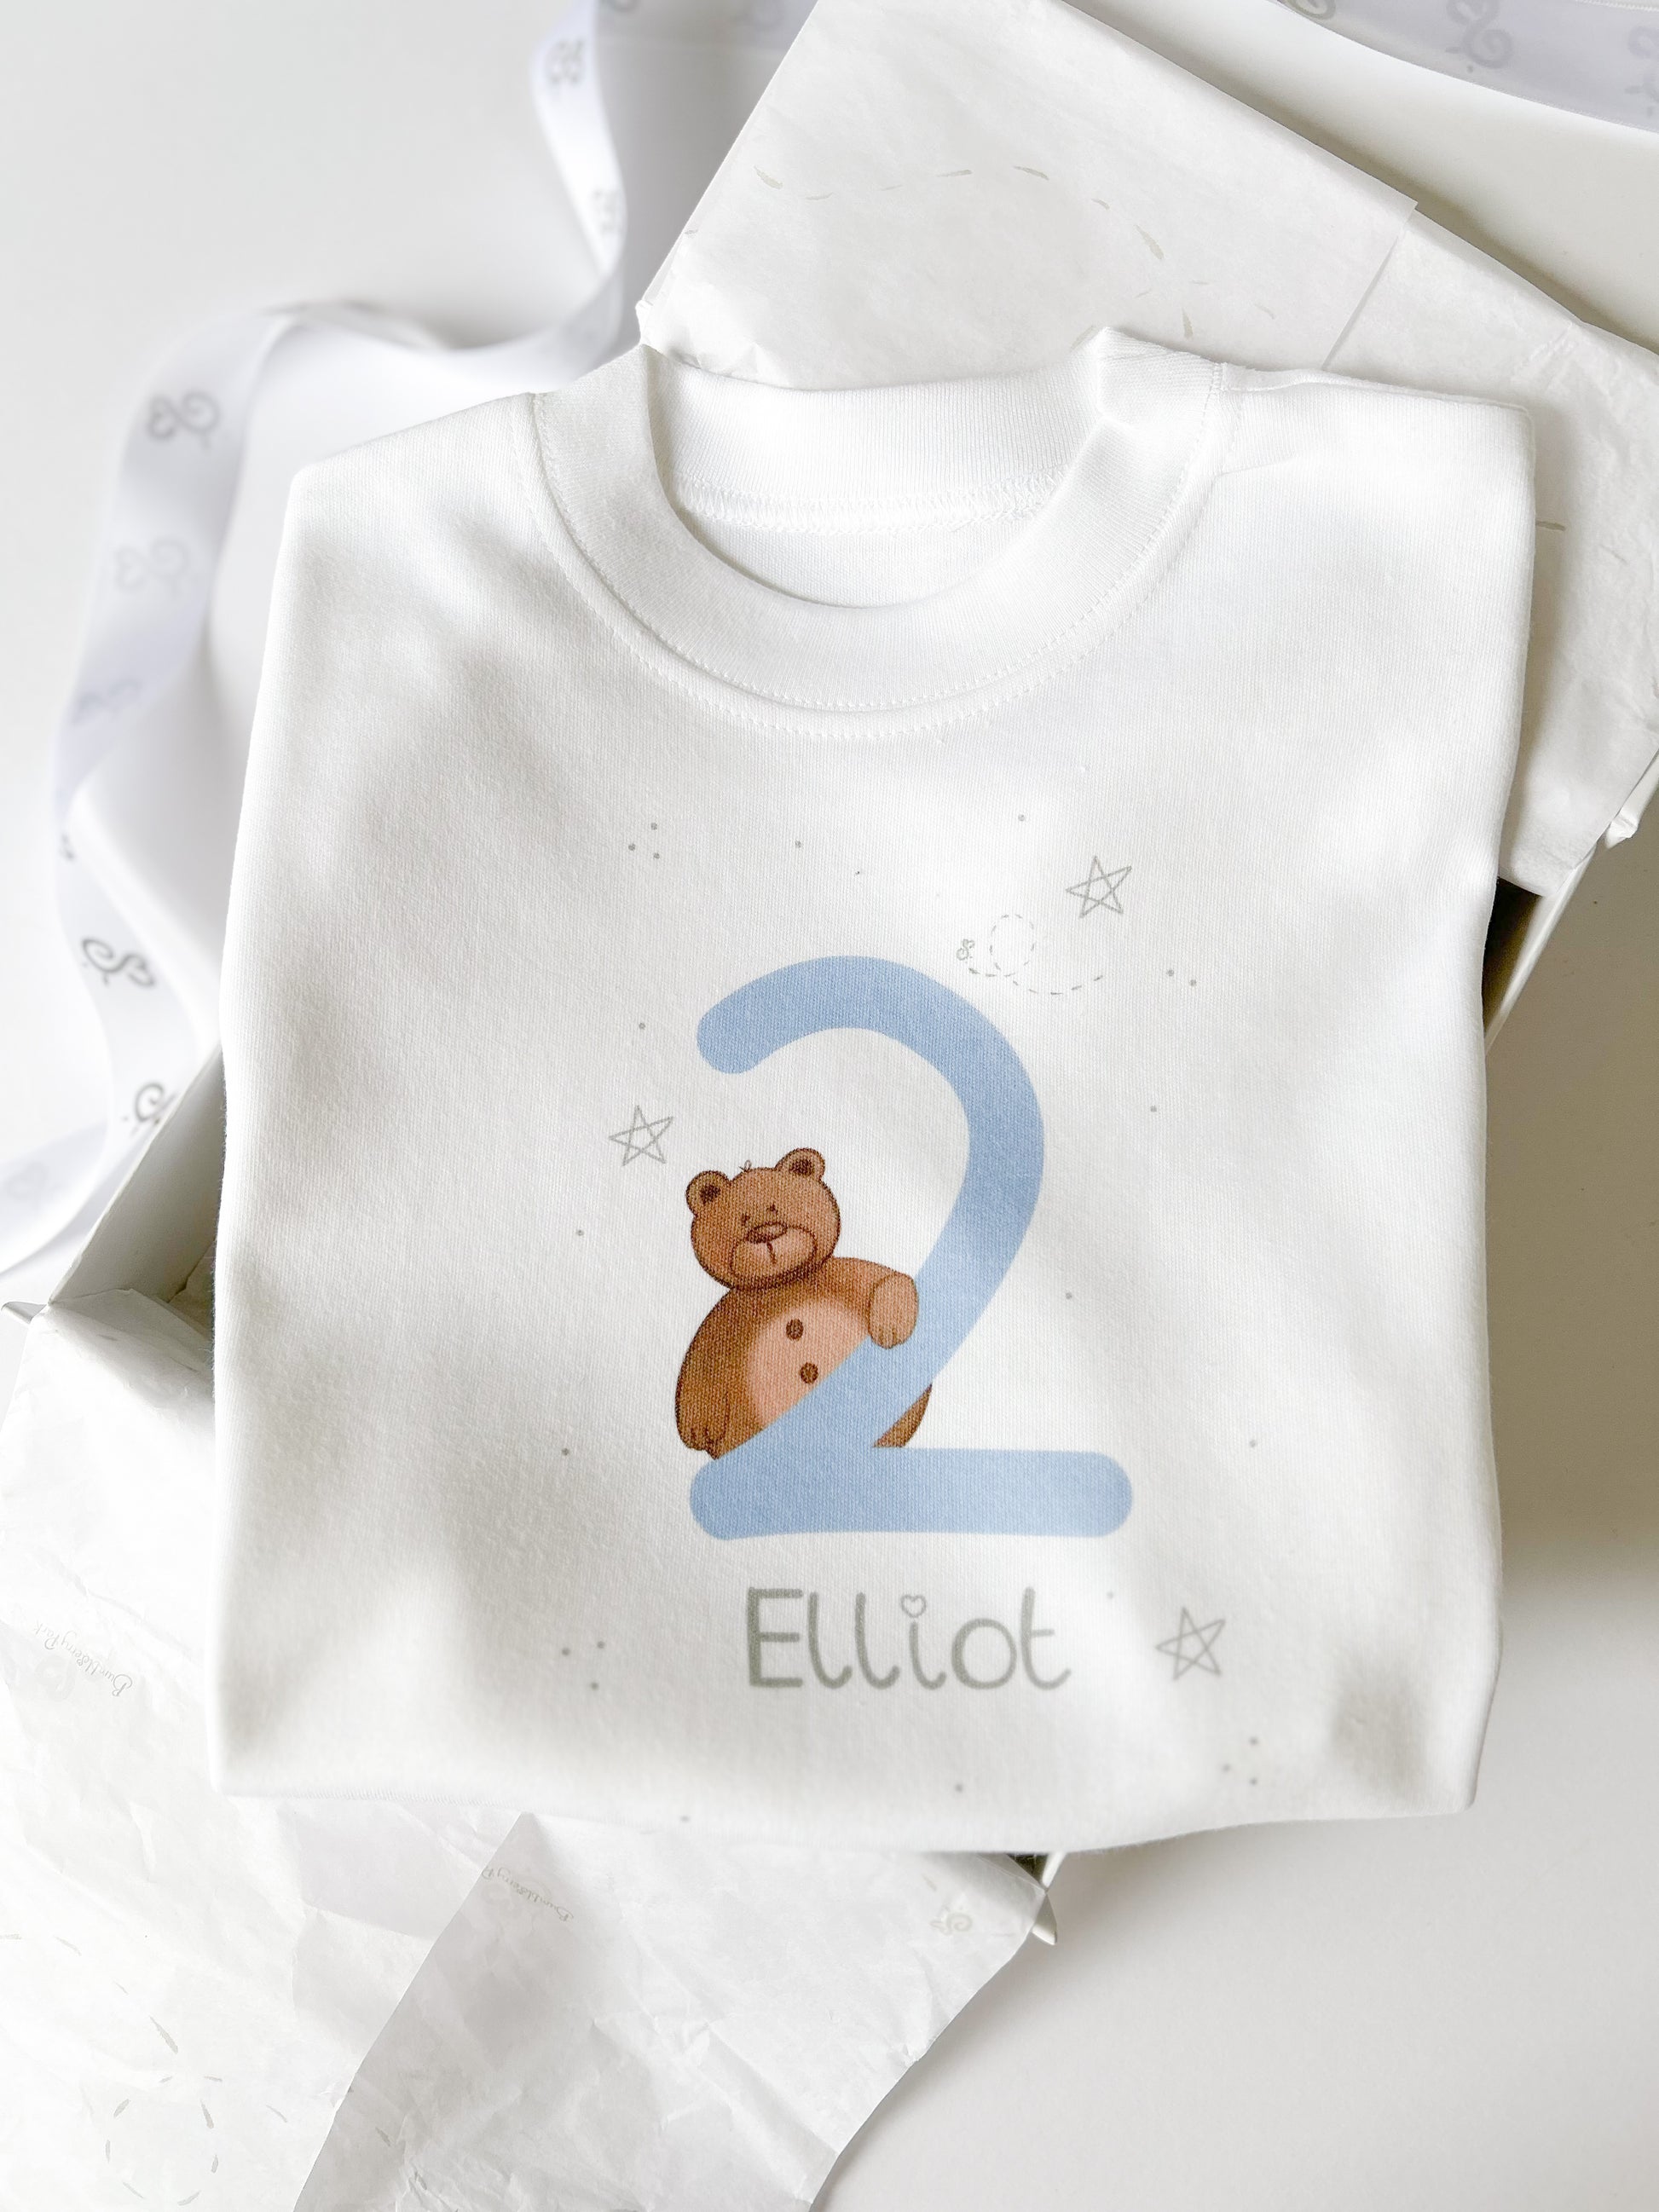 personalised 2nd birthday sweatshirt for girl with teddy bear peeking out behind the number 2 in muted colours